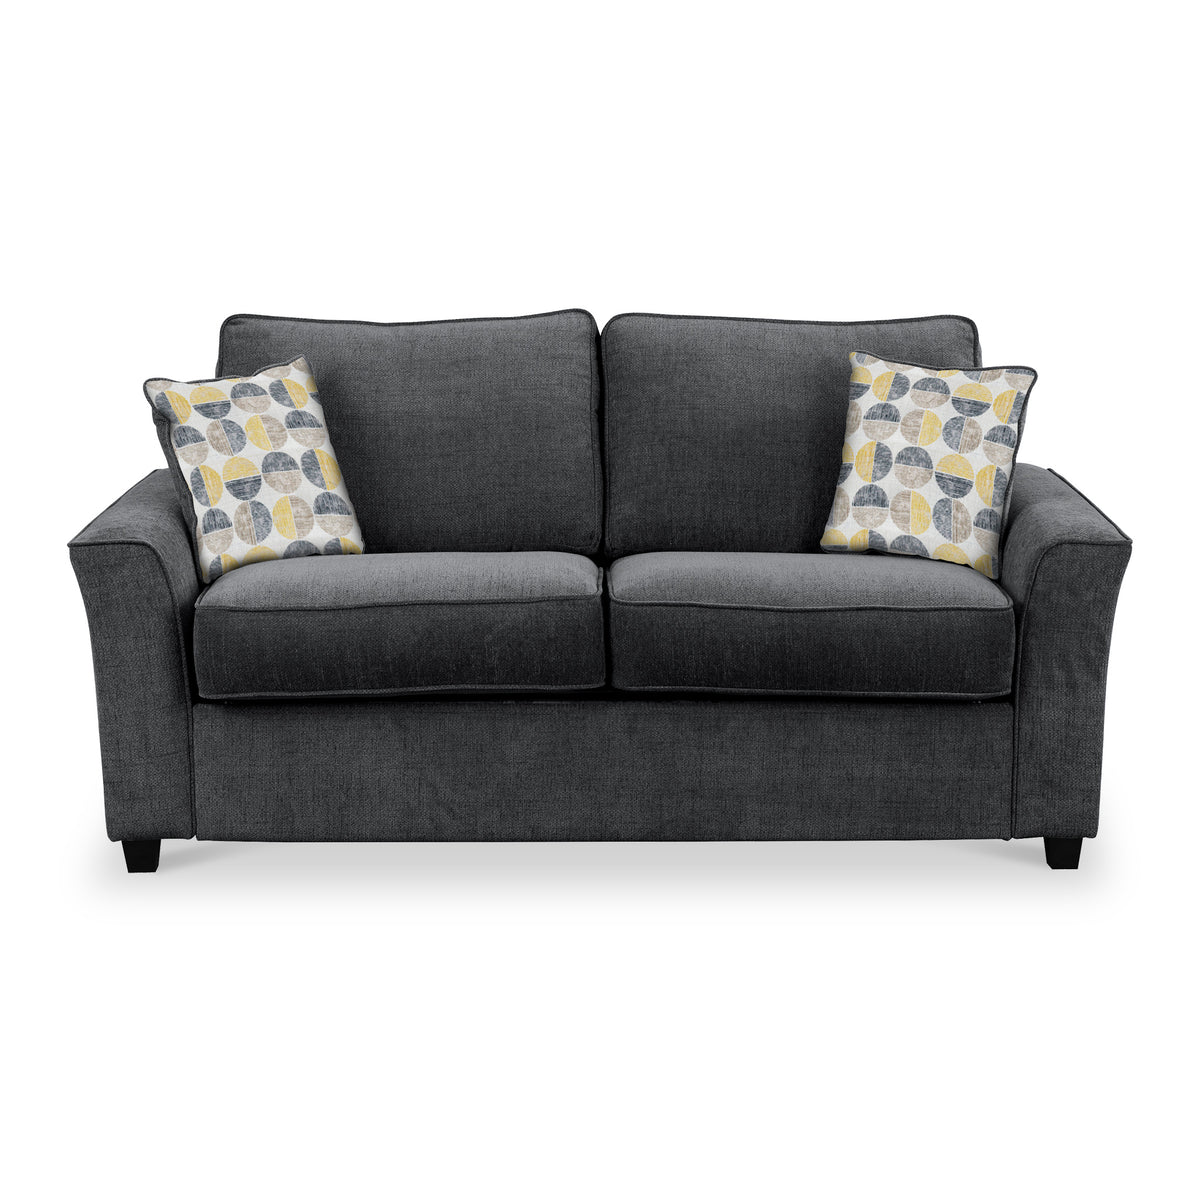 Abbott 2 Seater Sofabed in Charcoal with Rufus Beige Cushions by Roseland Furniture